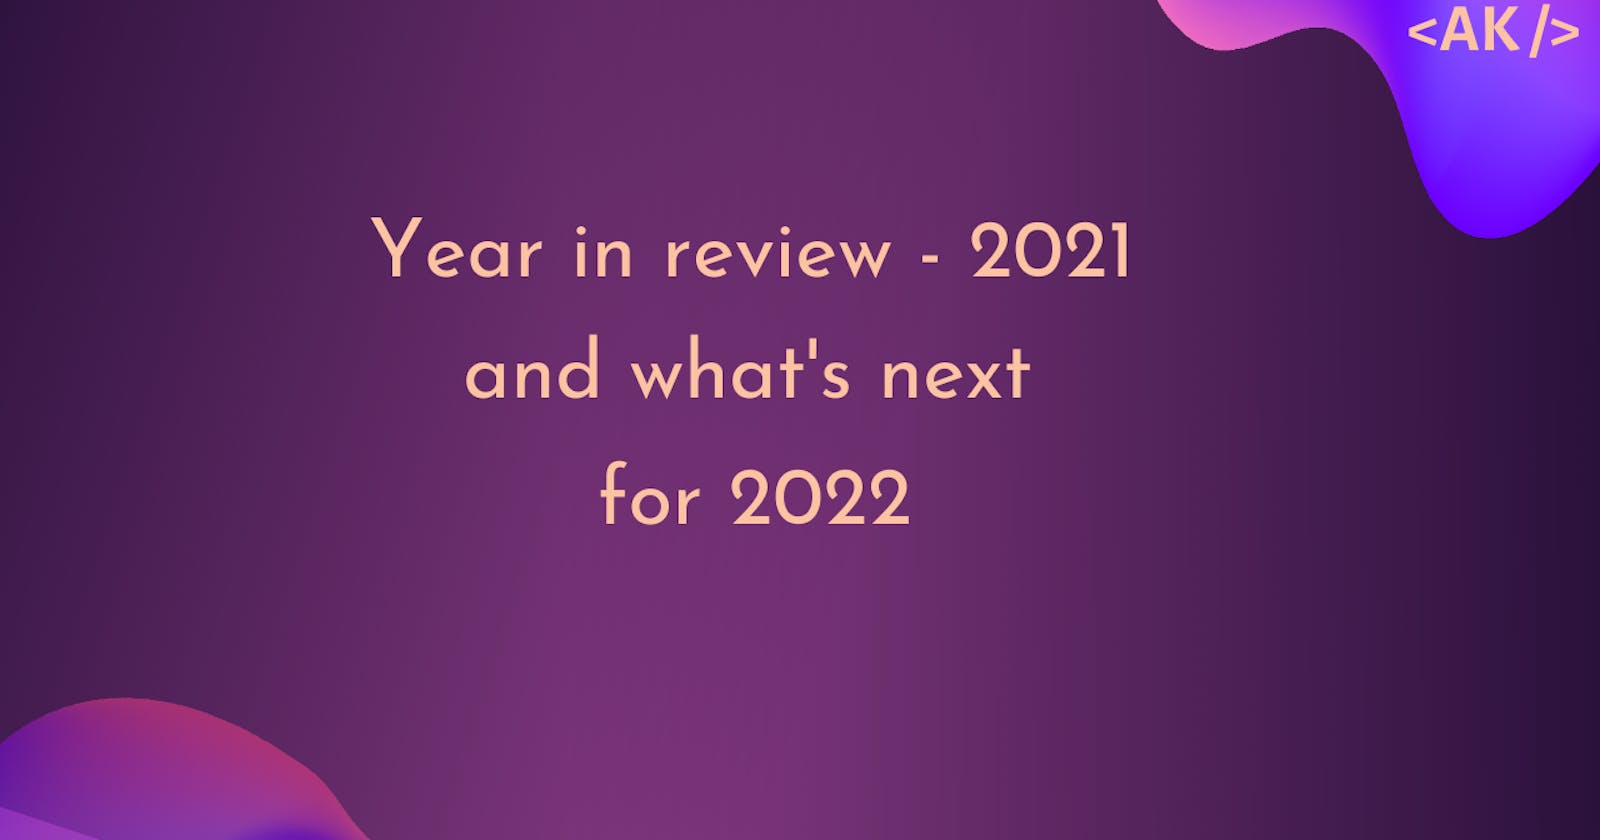 2021 reflections and what's next in 2022